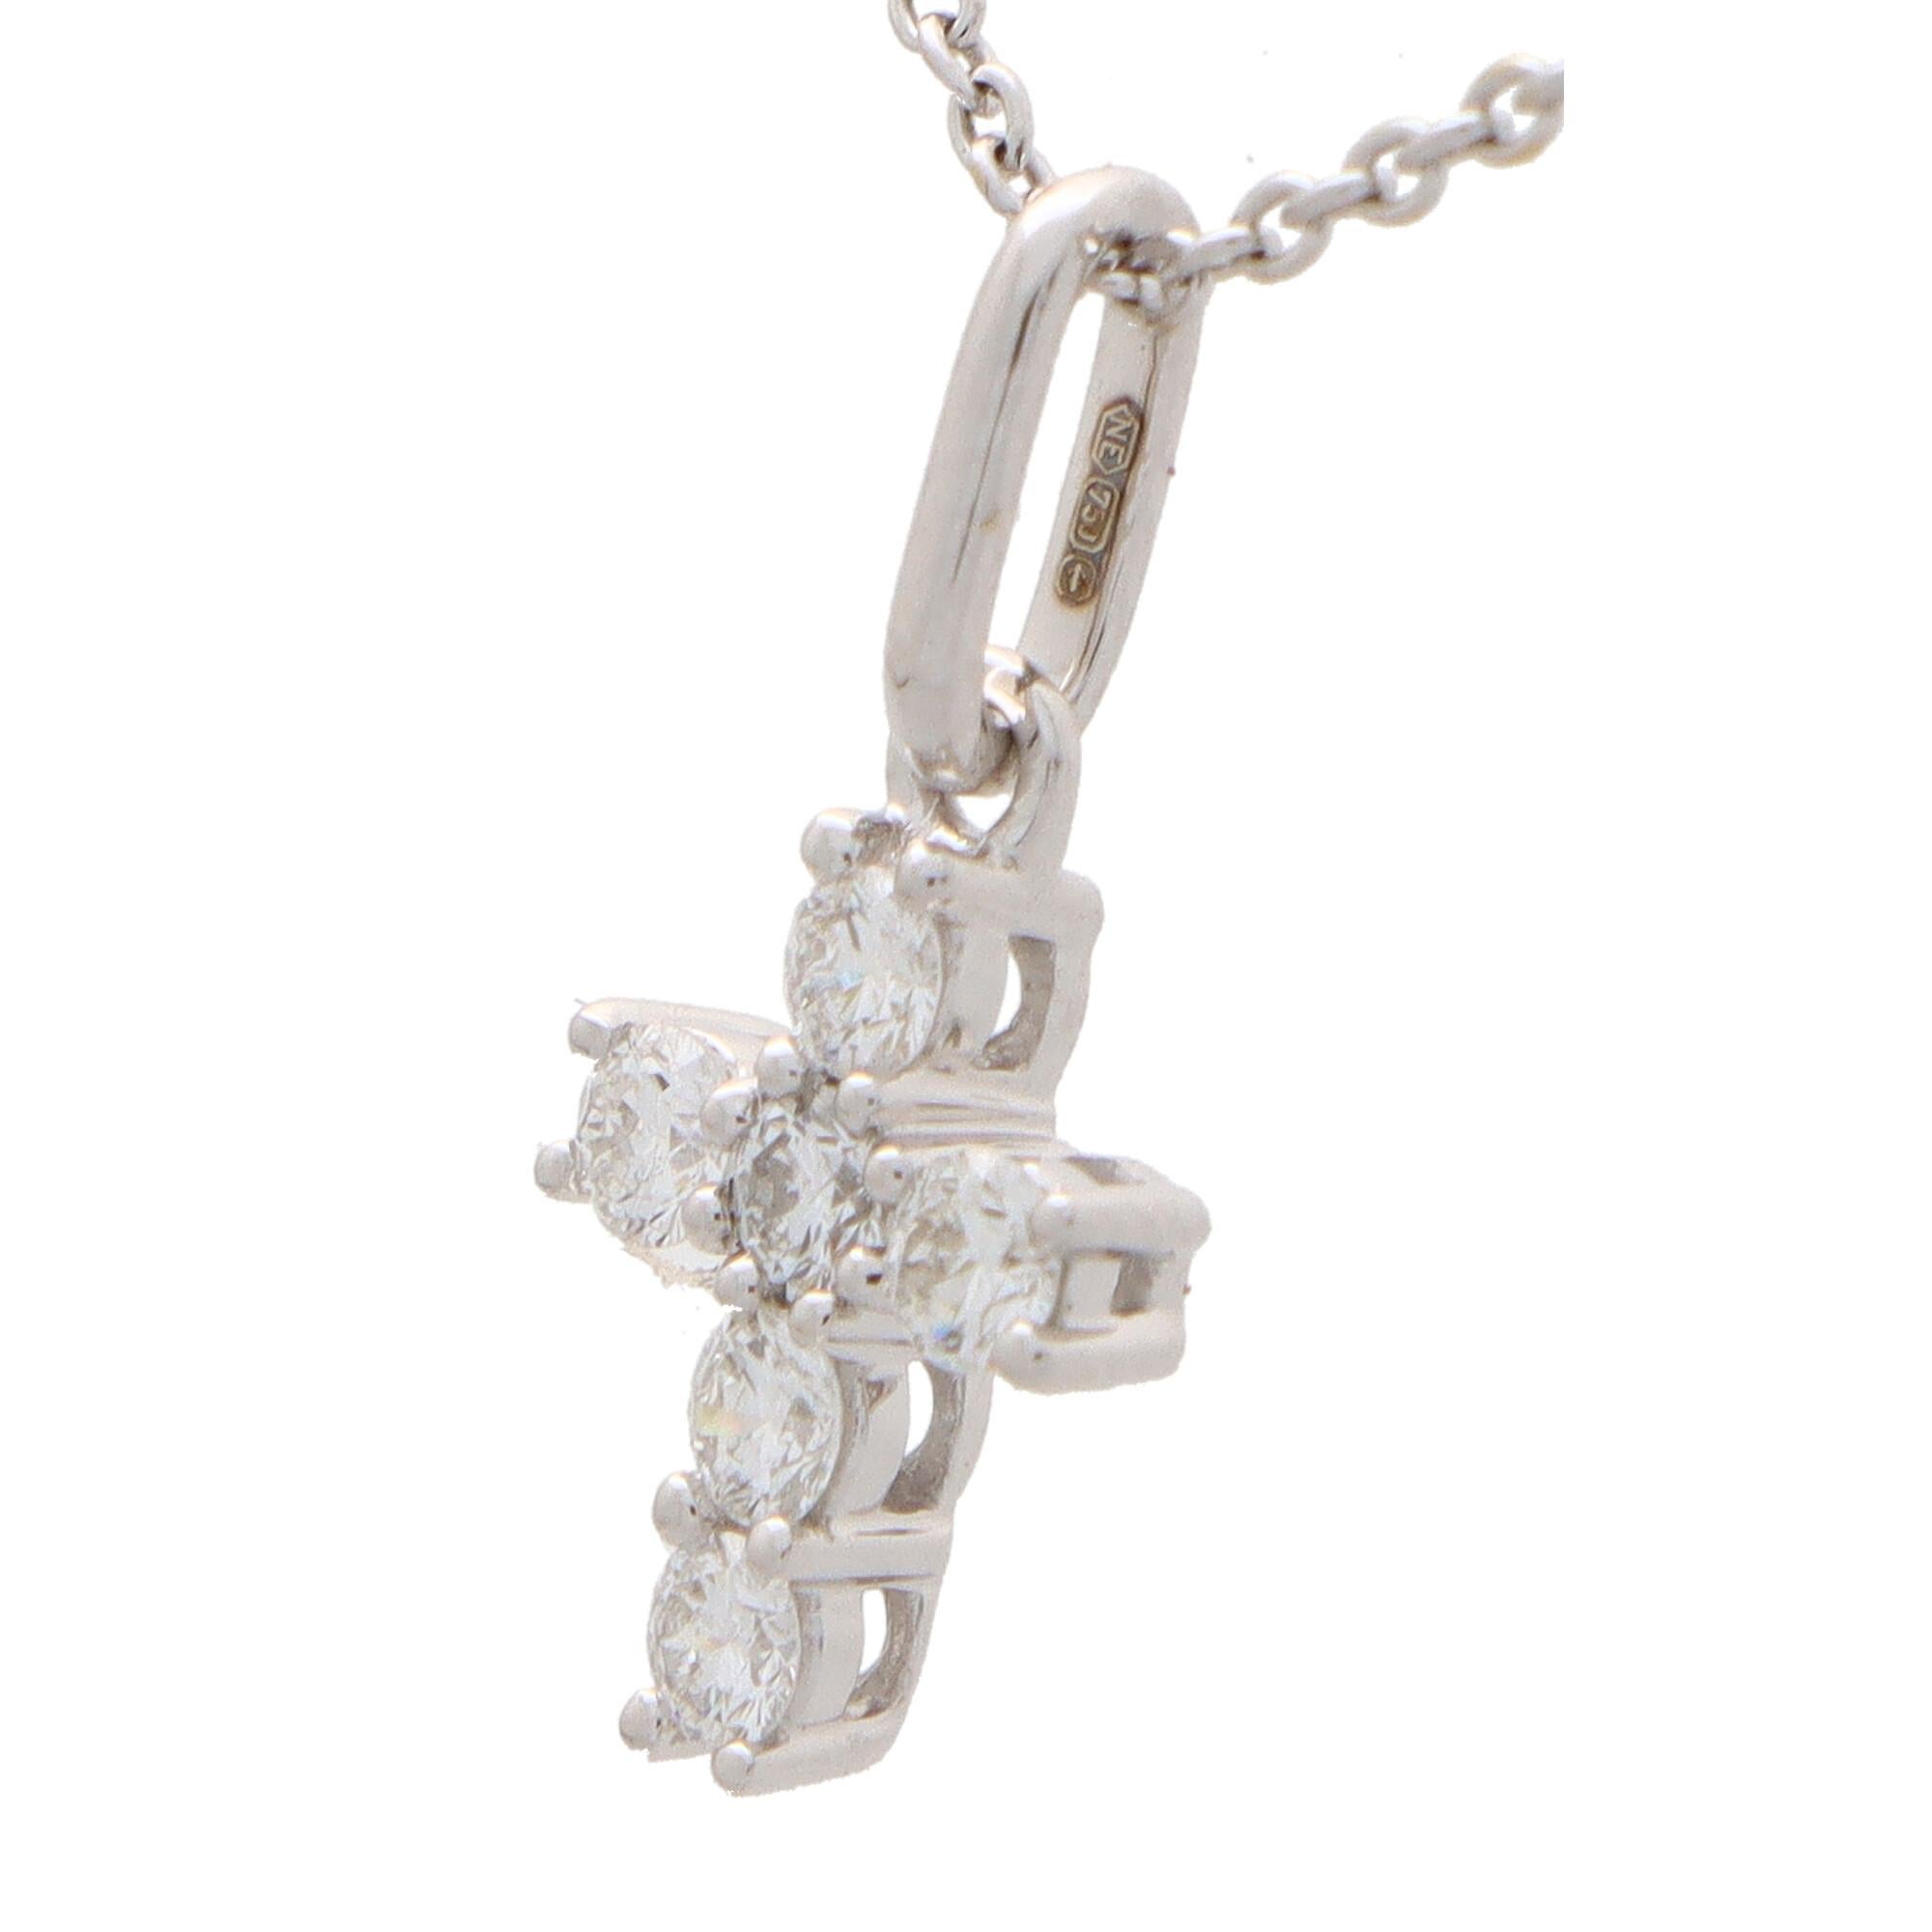 A lovely diamond cross pendant set in 18k white gold.

The cross itself is beautifully crafted and is composed of 6 individual claw set round brilliant cut diamonds. The cross hangs from a polish white gold bail allowing the pendant to be added to a